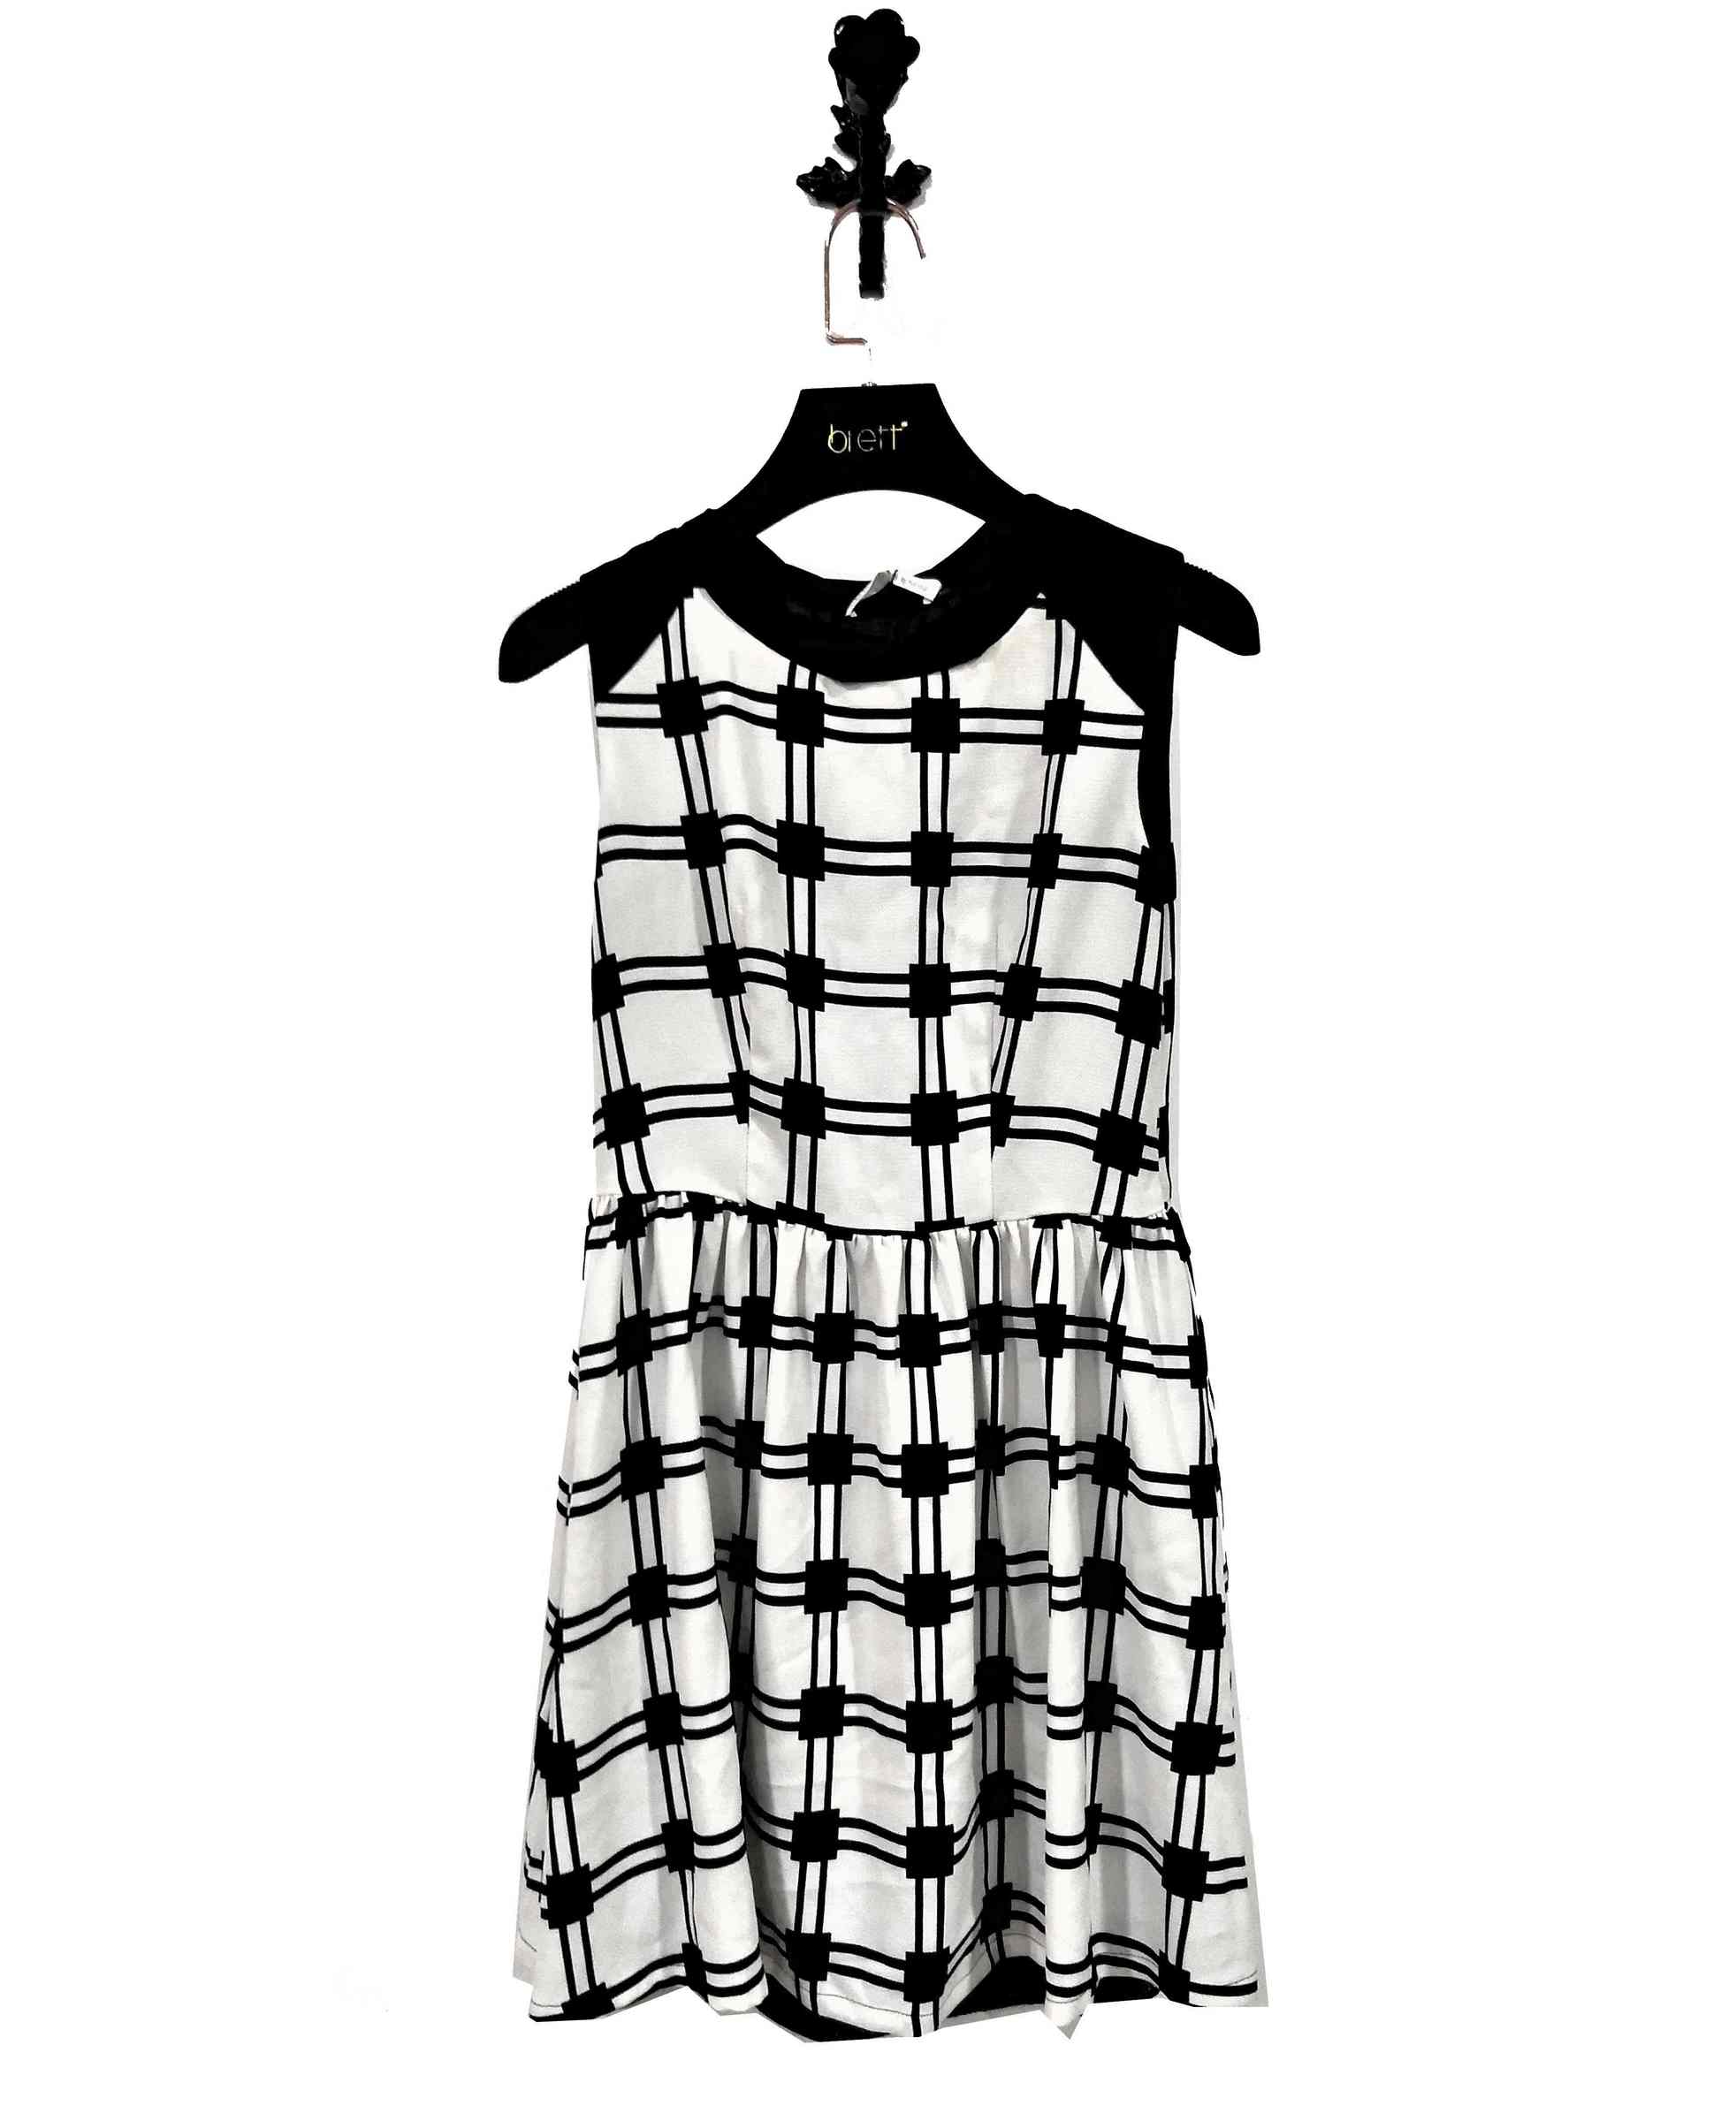 Cowl neck dress black white plaid check with fashionable dress for chinese clothes brands (8).jpg